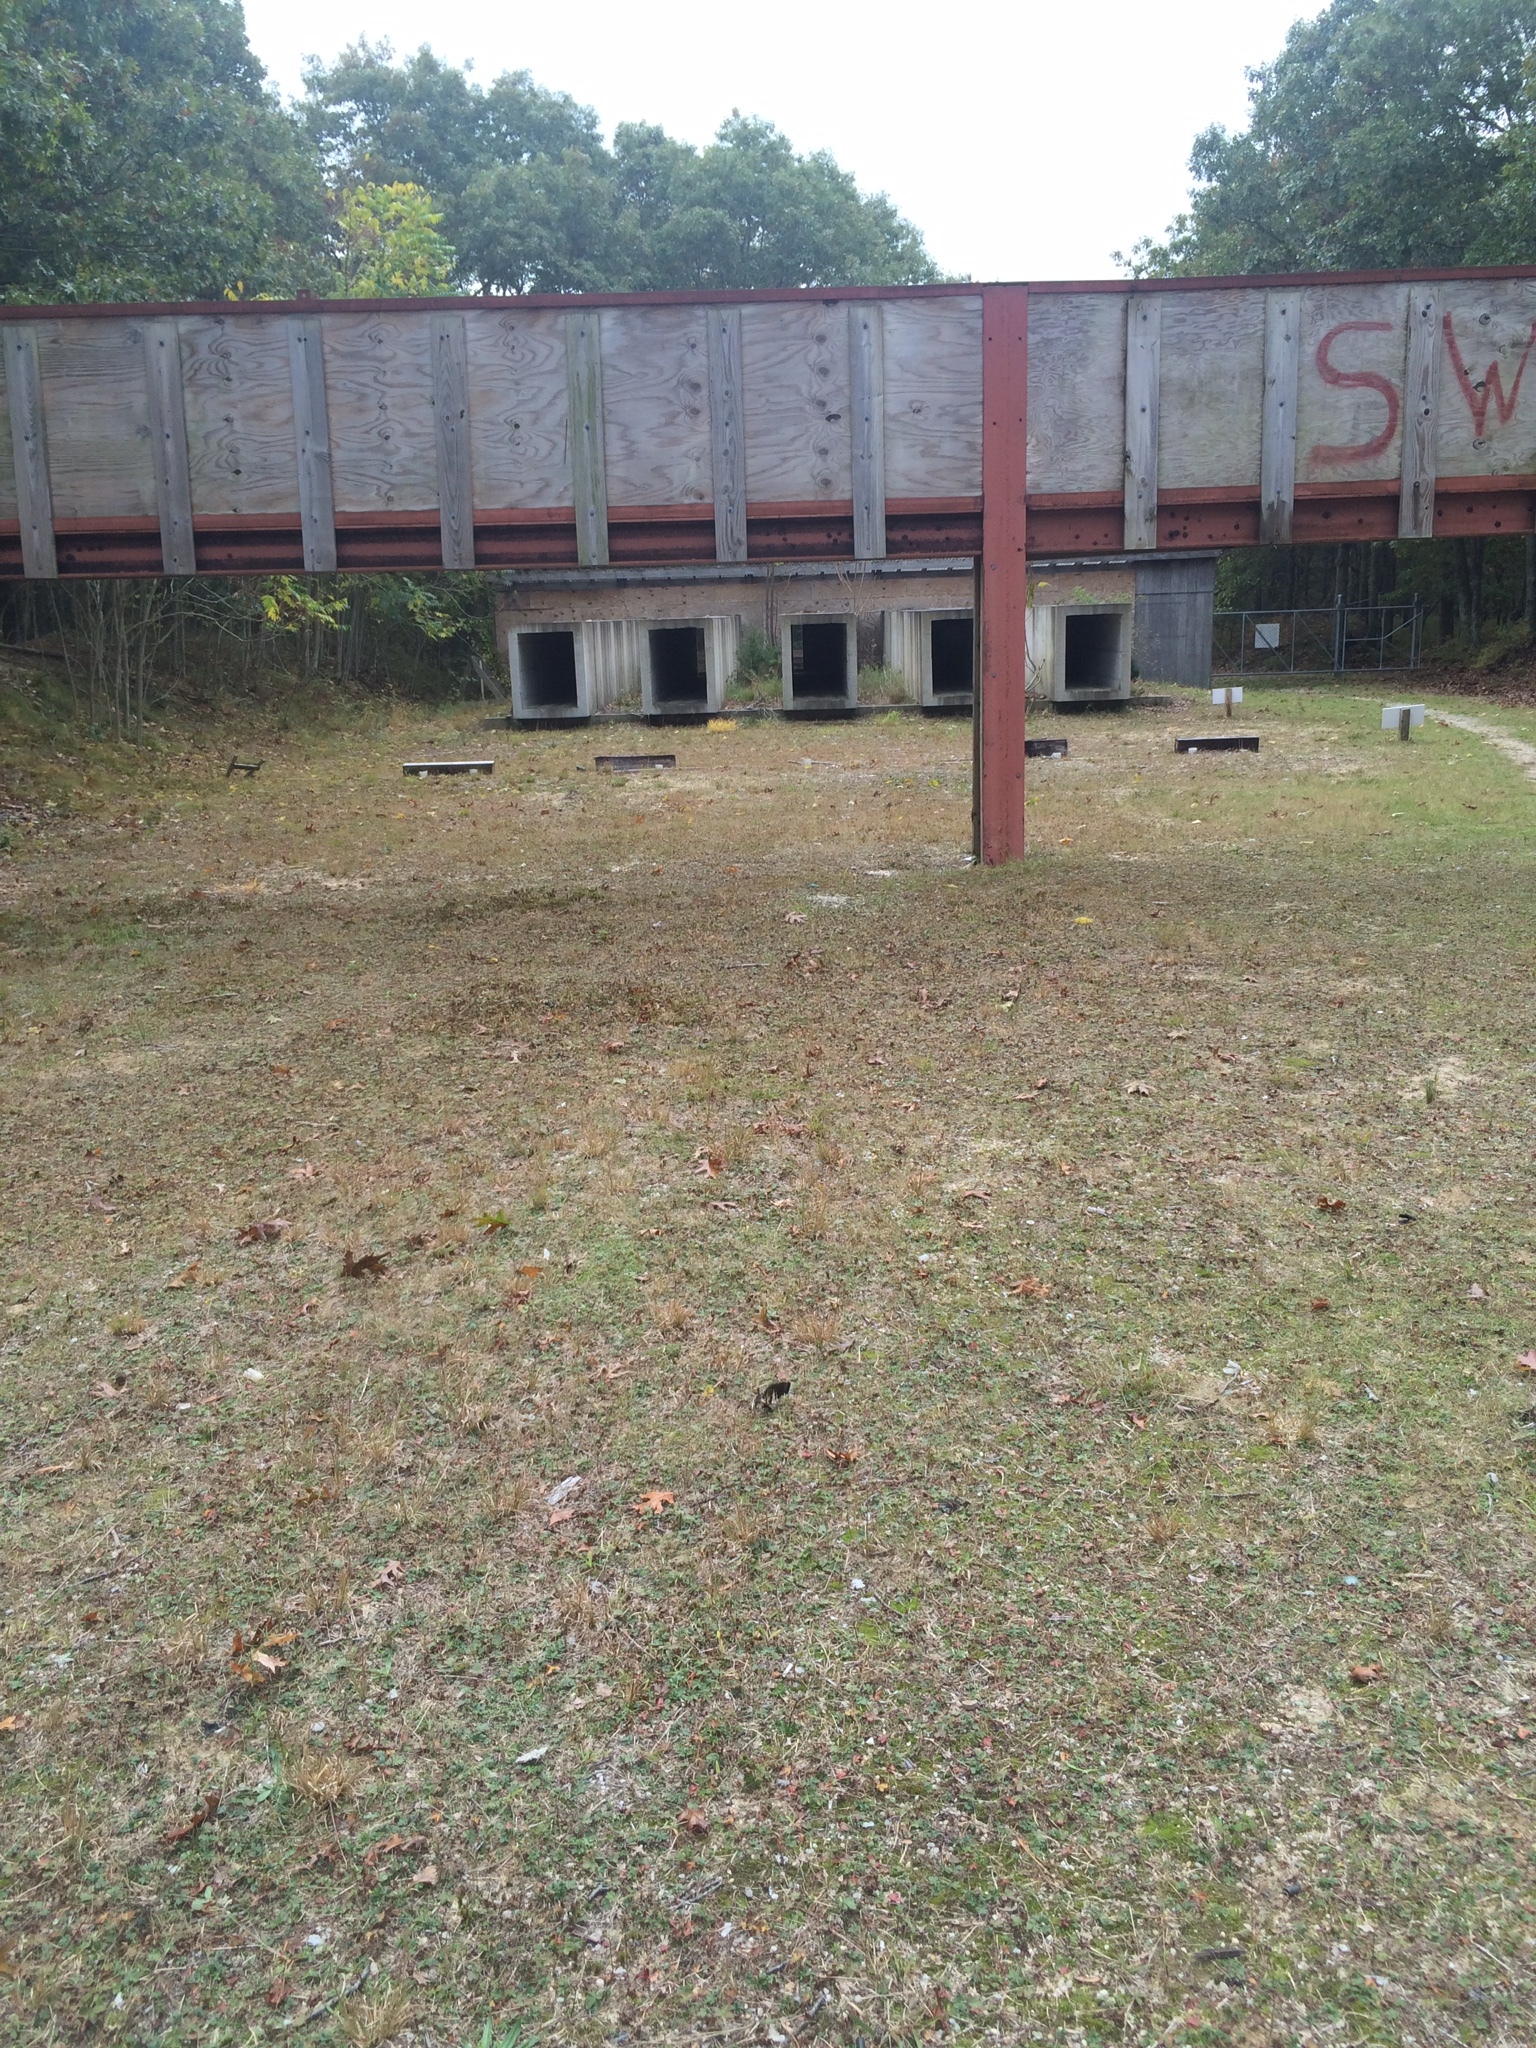 The shooting range at the Maidstone Gun Club from the target's view. At the end of the concrete shooting tunnels there is a wood shield intended to prevent errant or ricocheted bullets from exiting the range.